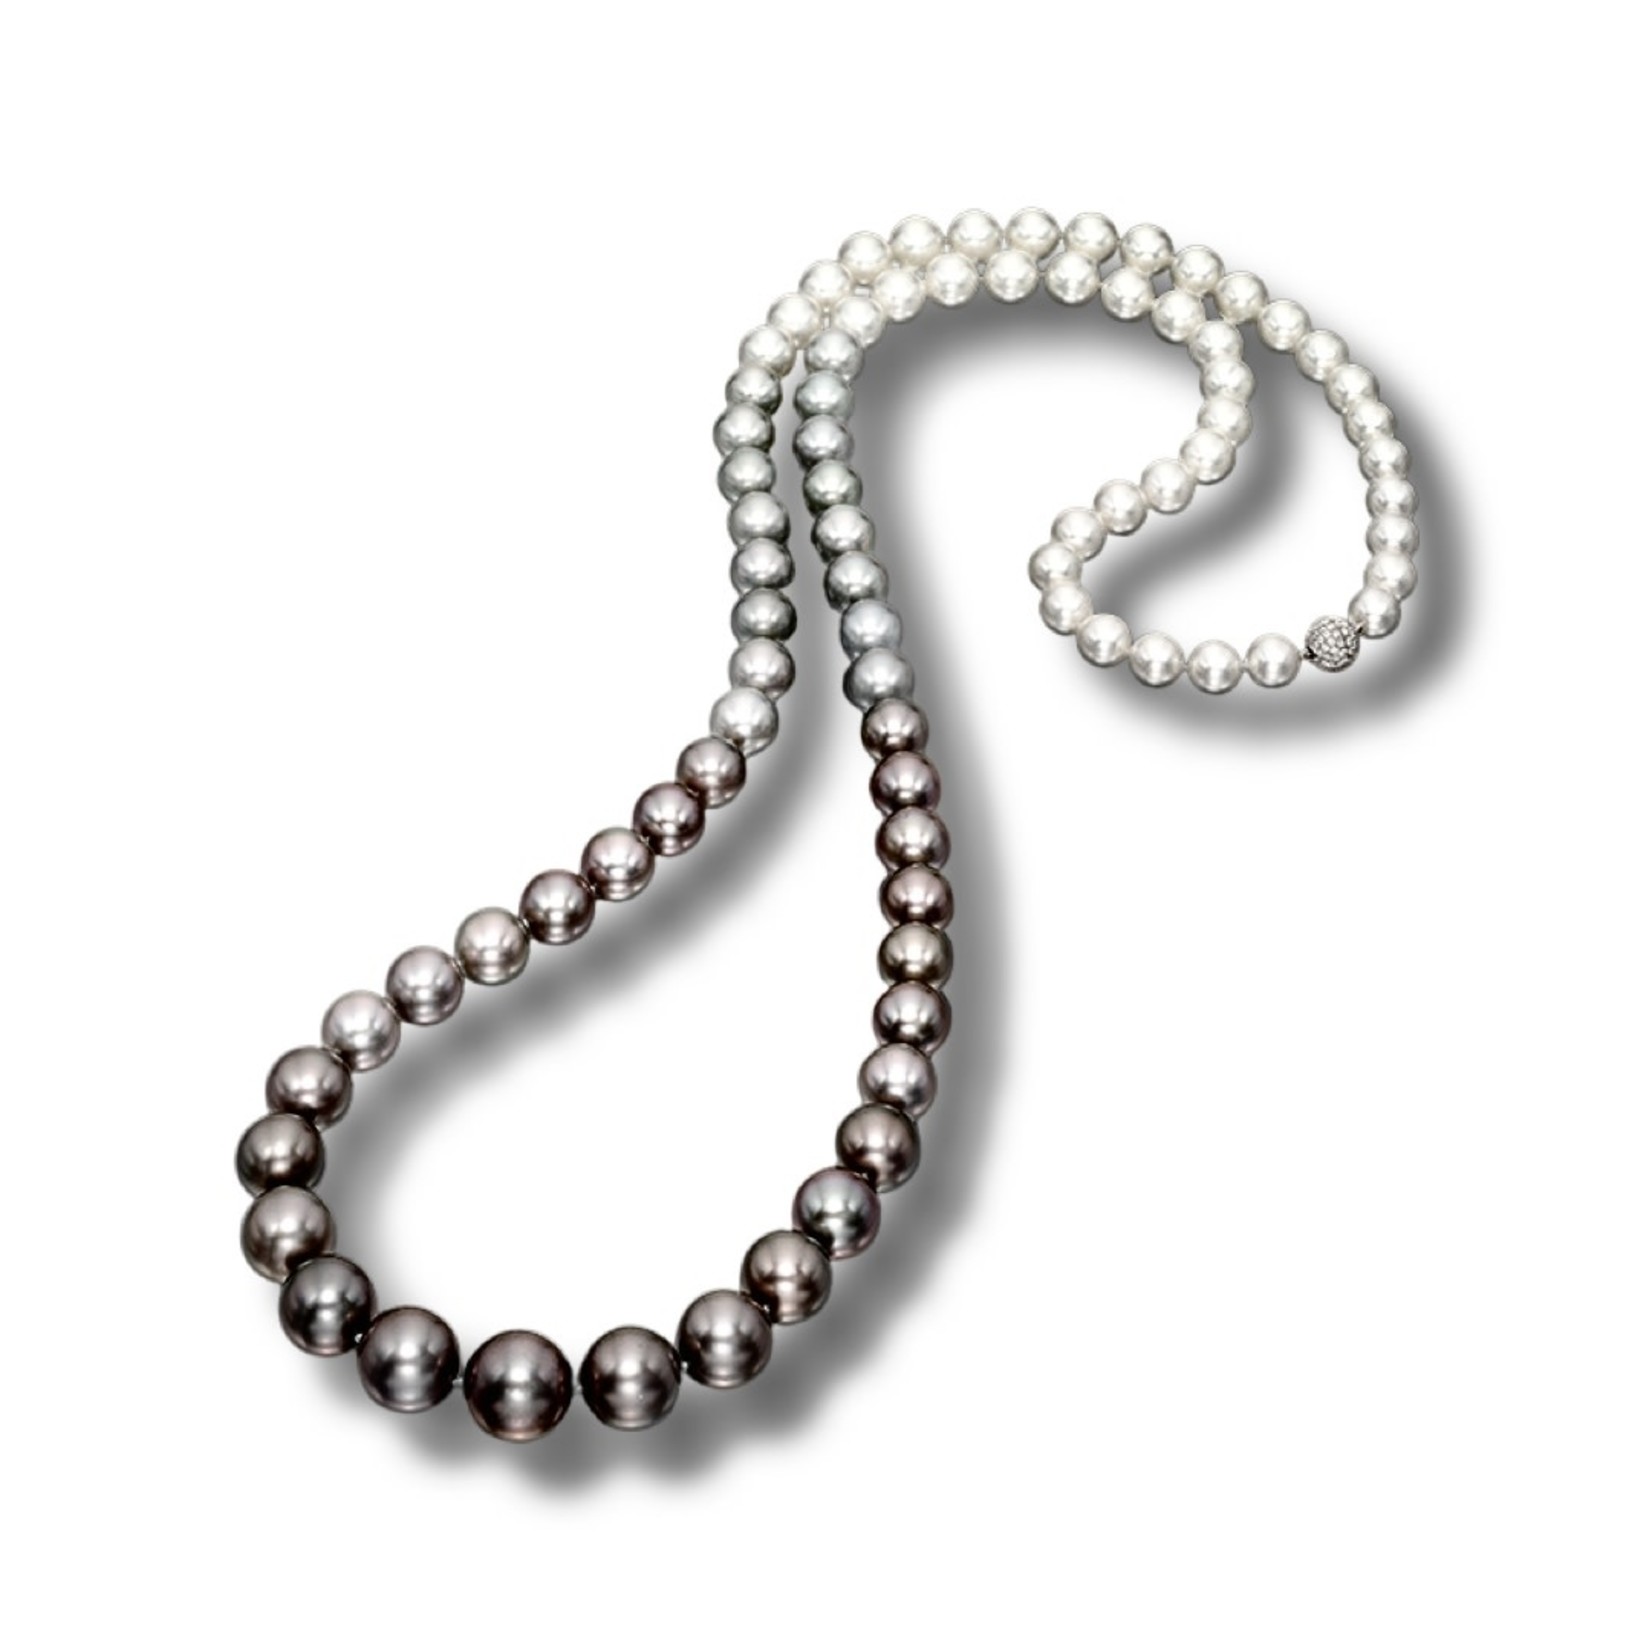 White South Sea pearl necklace with diamond ball clasp